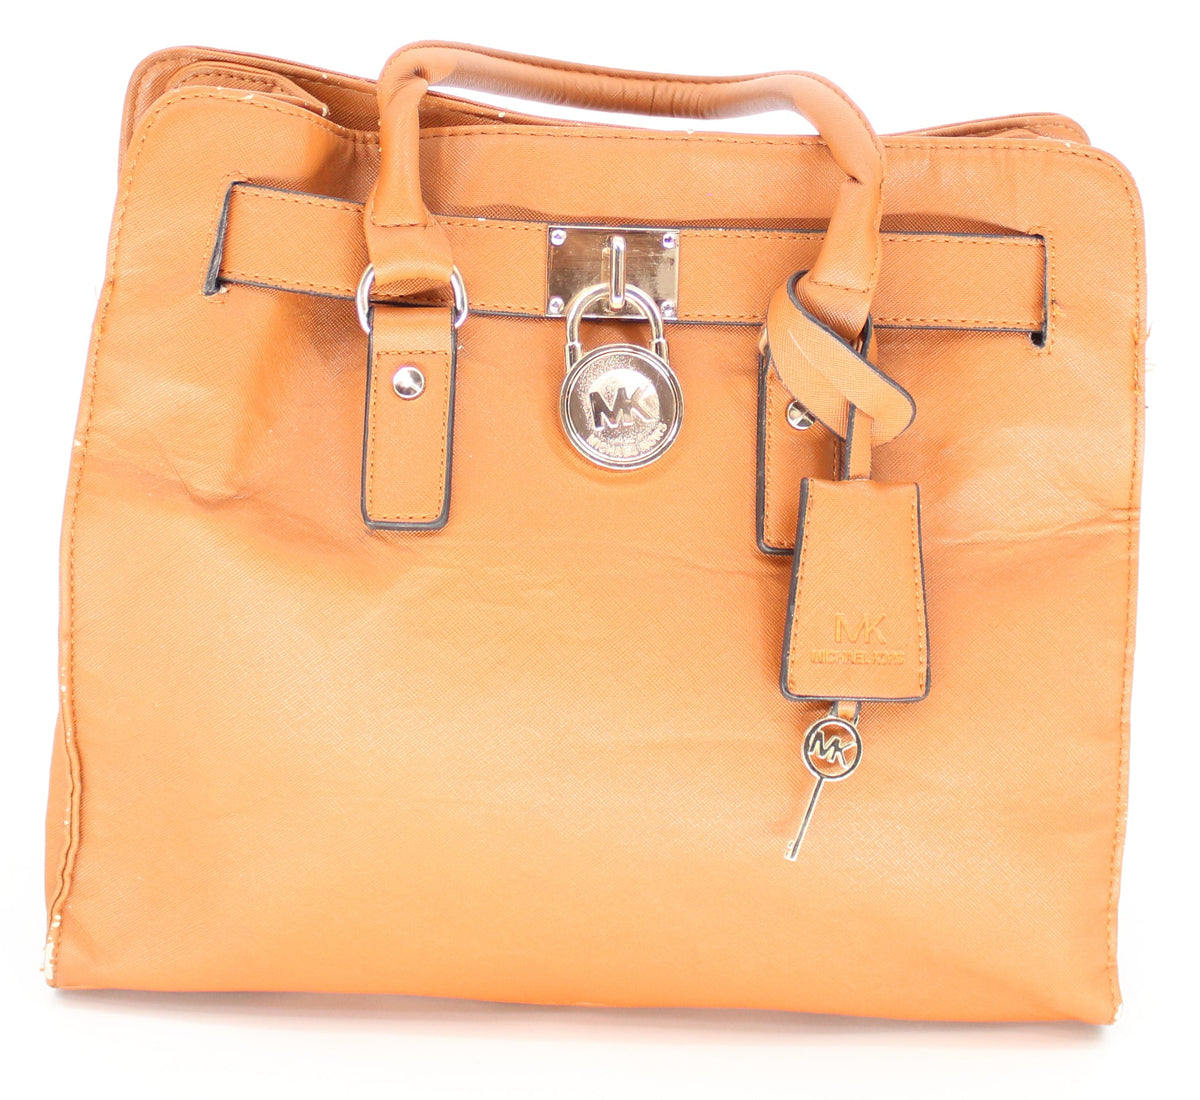 Michael Kors Tan Leather Bag with Gold Lock